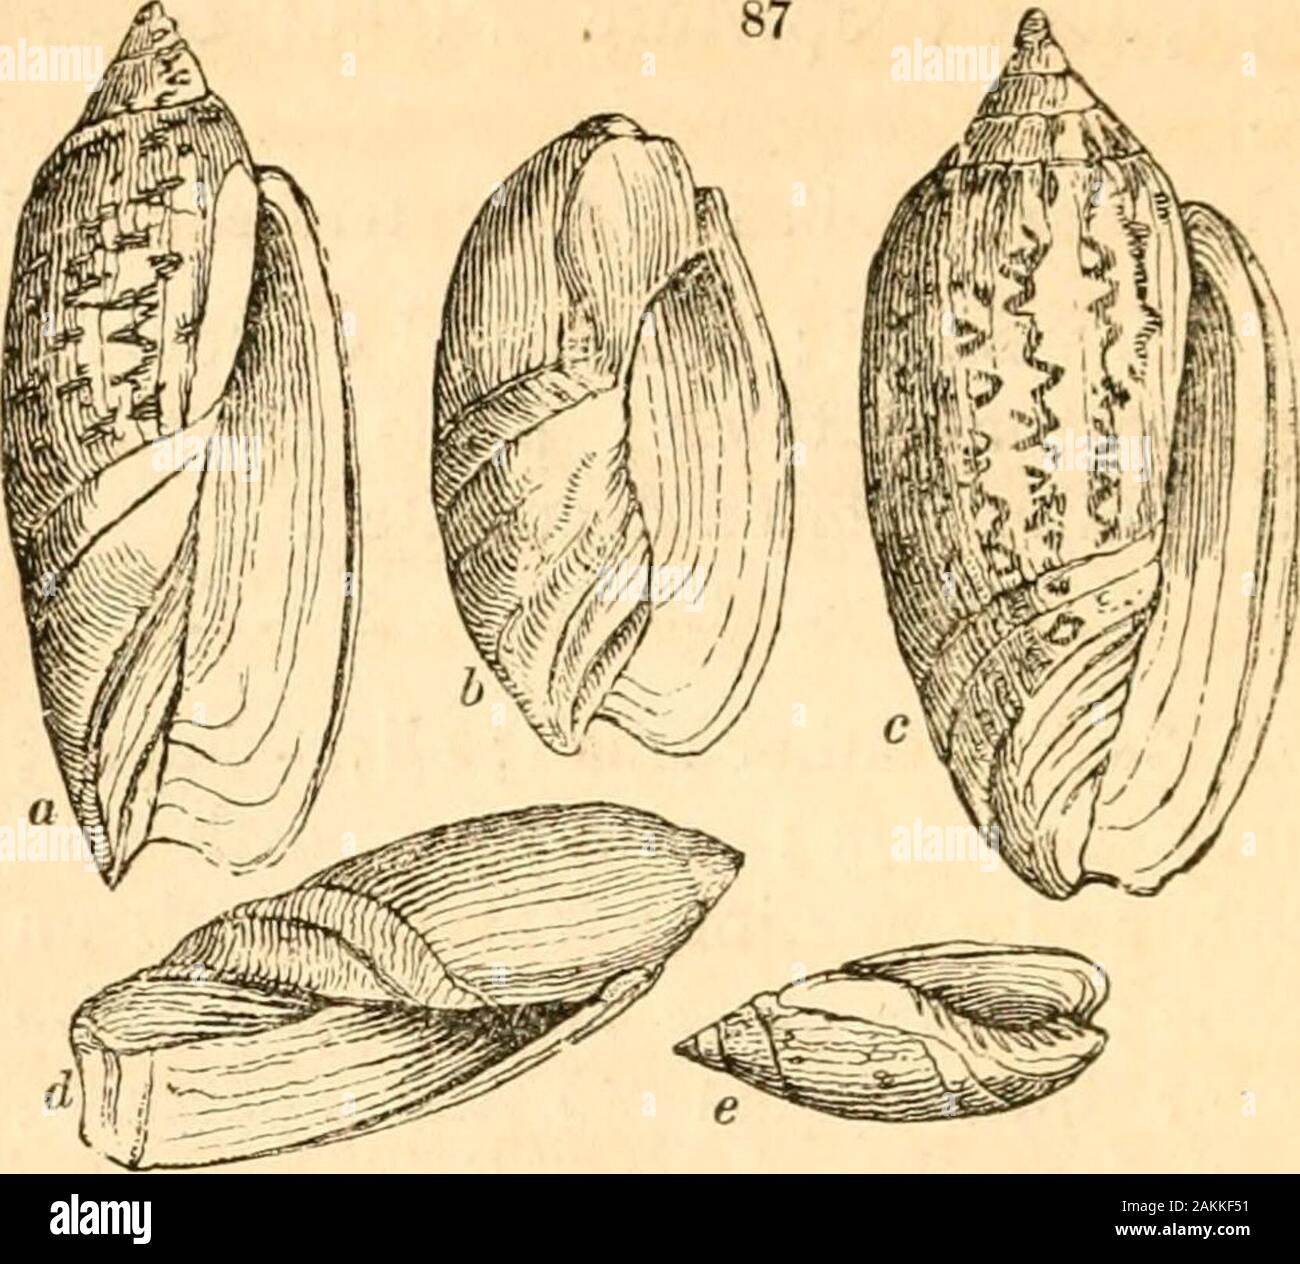 A treatise on malacology; or, Shells and shell fish . 322 SHELLS AND SHELL-FISH. 87 PART II.. ScAPHULA Sw, (fig. 87- &.) Spire very short, thick, ob-tuse, and not defined; aperture very wide, with onlytwo or three obhque plaits at the base. S. patula Sow. Tank. Cat. 2331. (6.) HiATULA Sw. {fig. 87. «.) General shape of Oliva ; butthe upper part of the pillar is not thickened ; thelower tumid, and marked with a few oblique plaits;the aperture wide, the base effuse. Lamarckii. Zl.Il. ii. p.78.f. 1. maculosa. lb. 78. f. 3.pallida. lb. 78. f. 2. ? striata. lb. pi. 40. f. 2. OliveijI.A Sw.* (fig. 8 Stock Photo